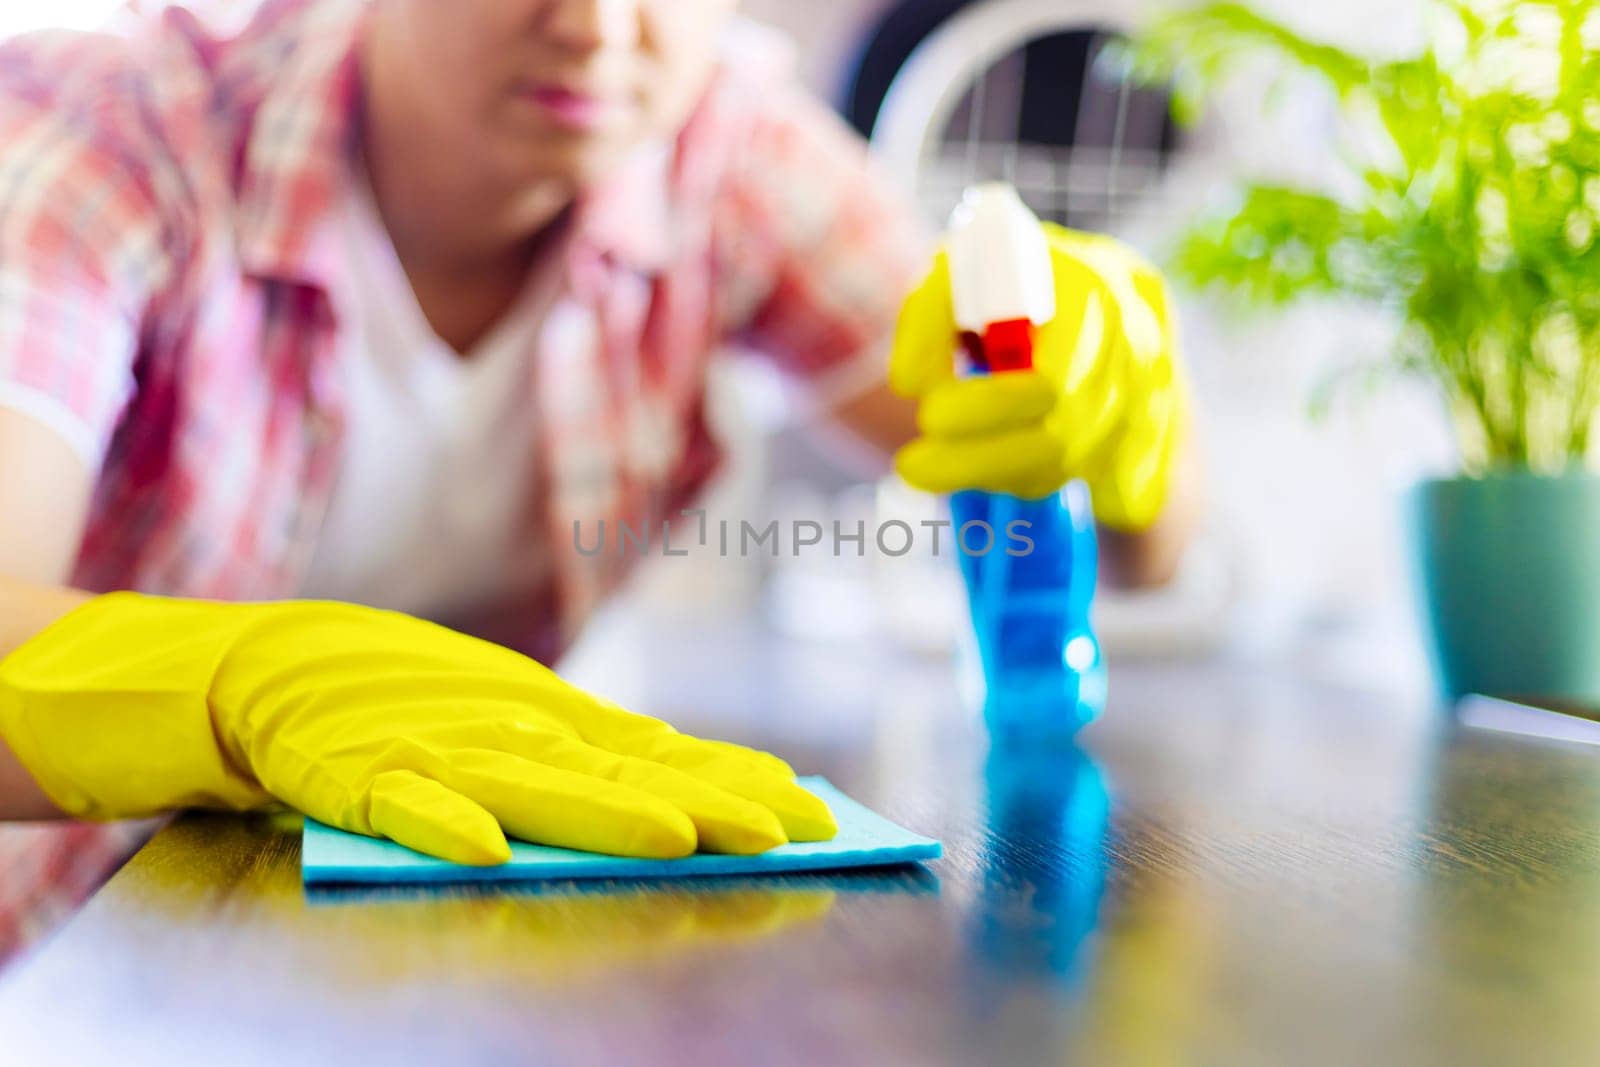 Housewife in yellow gloves wipes dust using spray detergent and rag. The woman is doing household chores. Cleaning concept